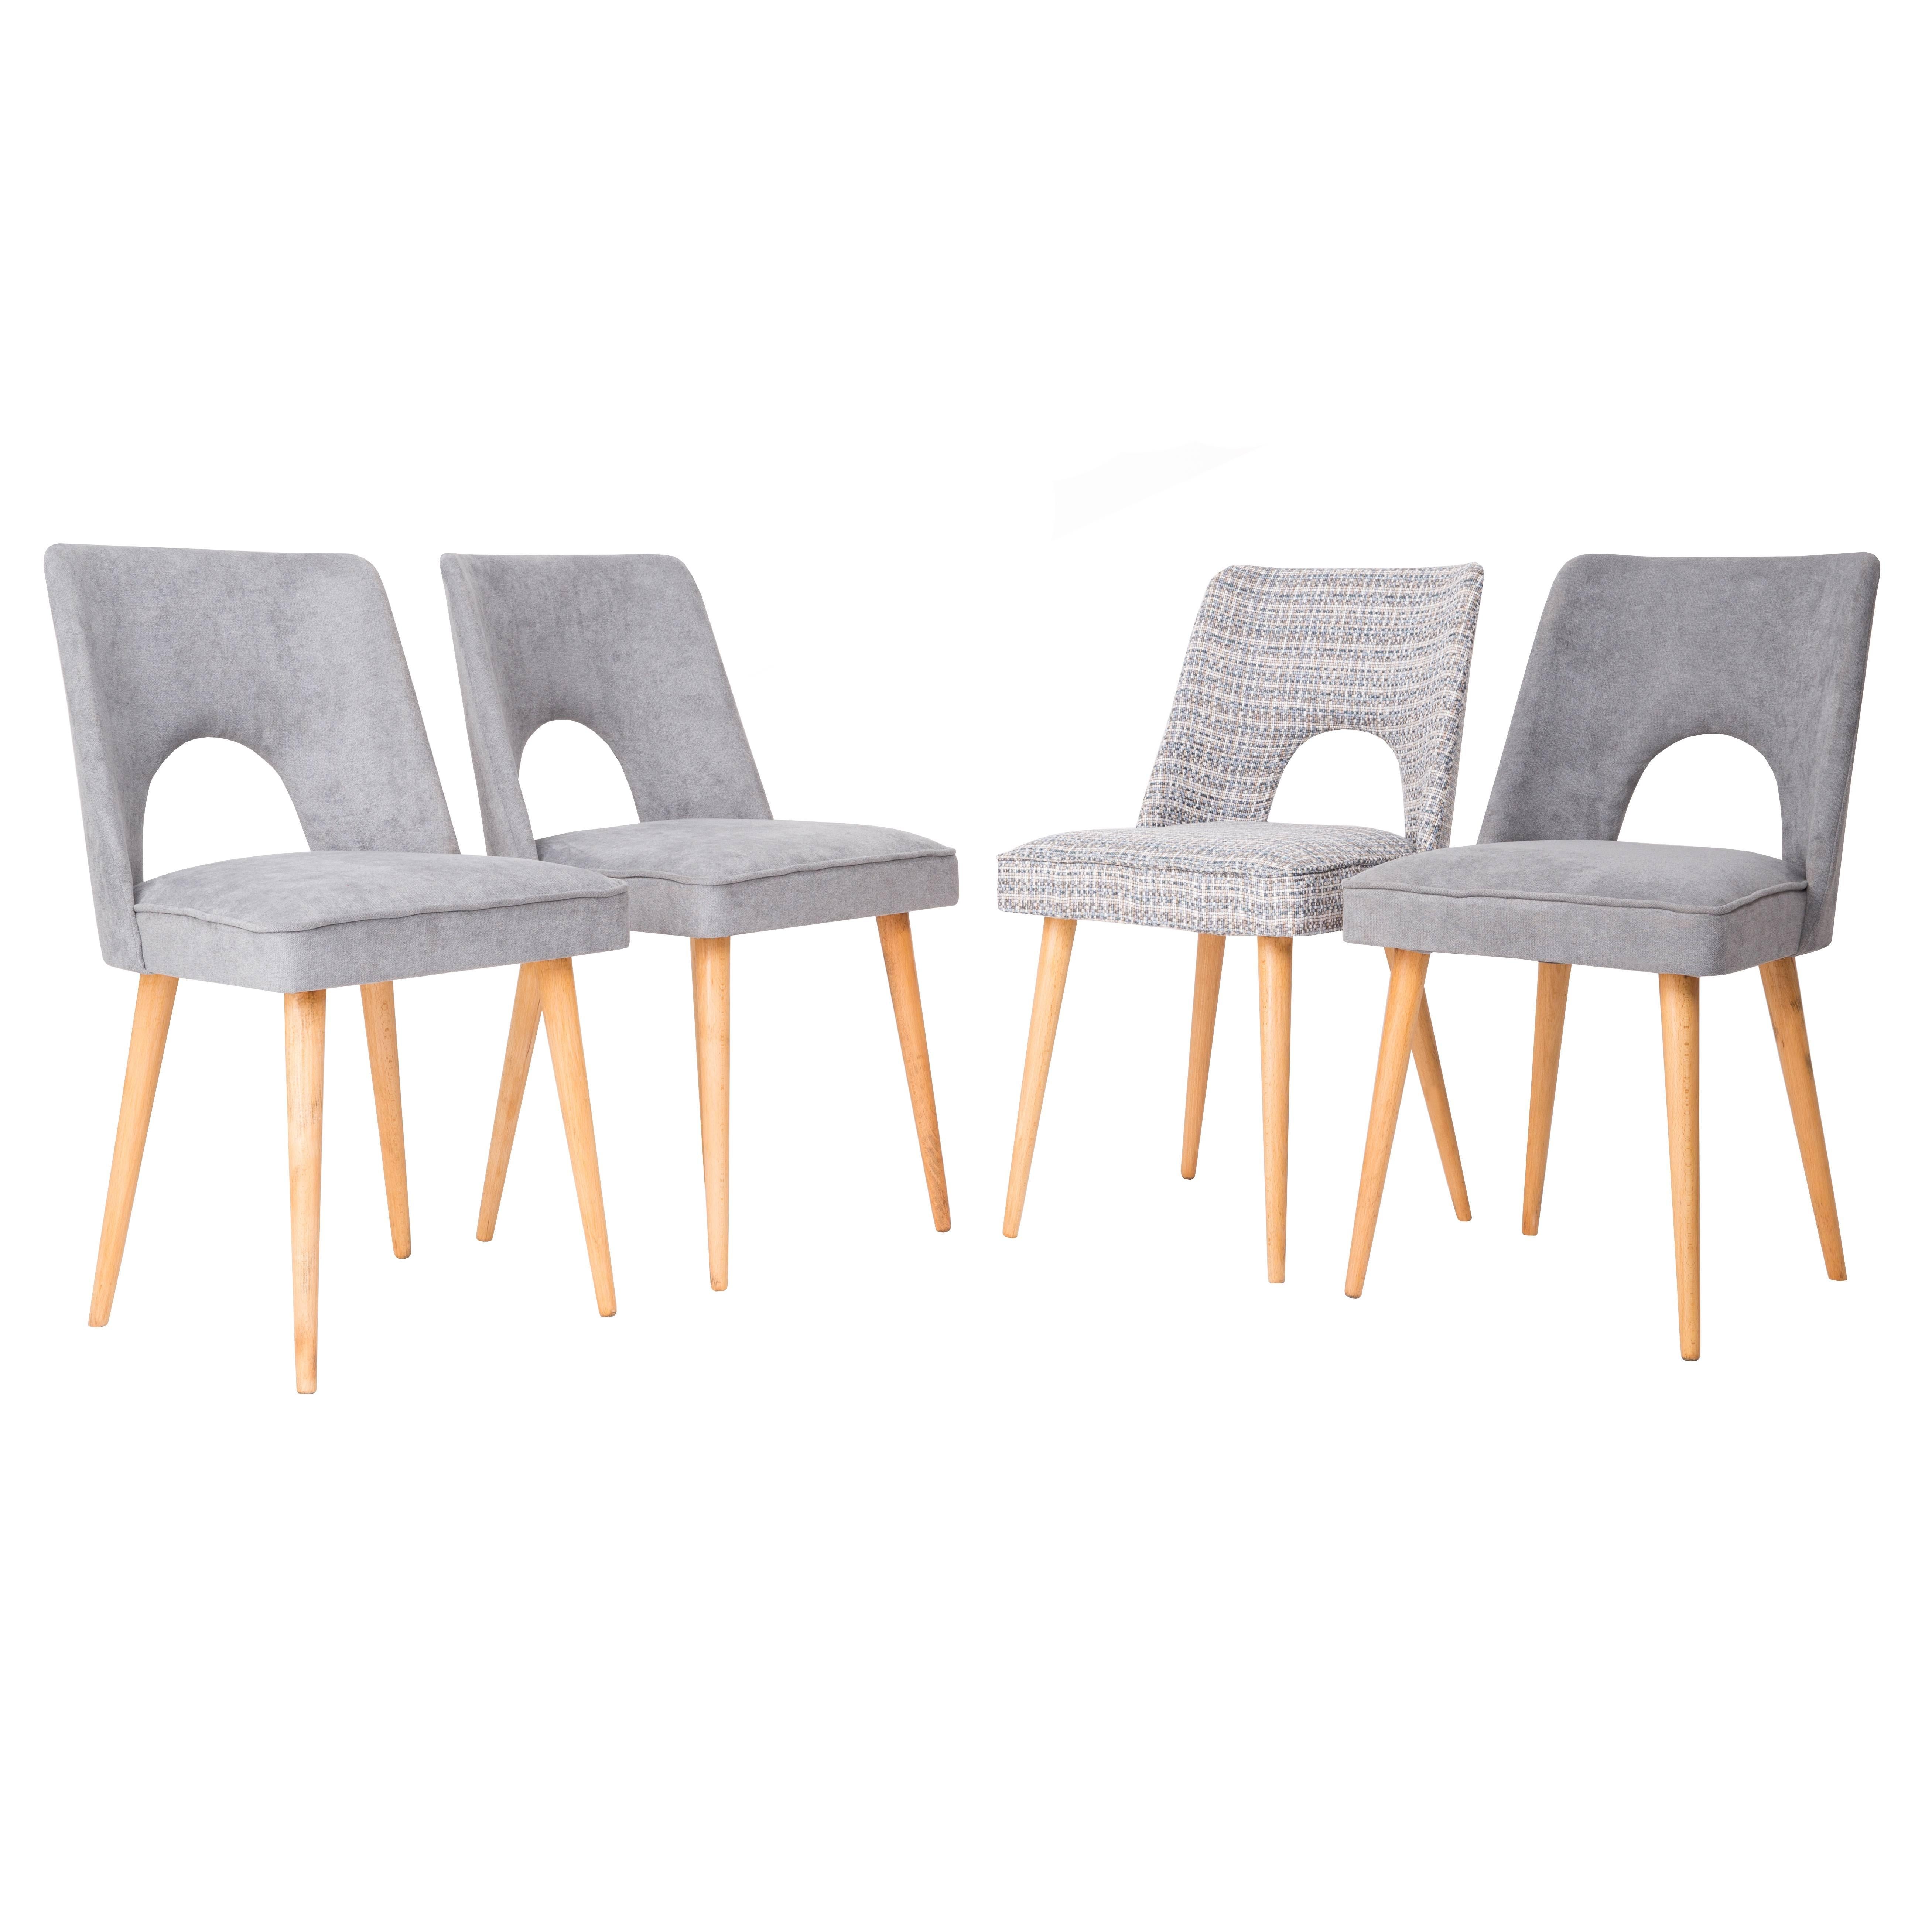 Set of Four Mid Century Grey "Shell" Chairs, Europe, 1960s.